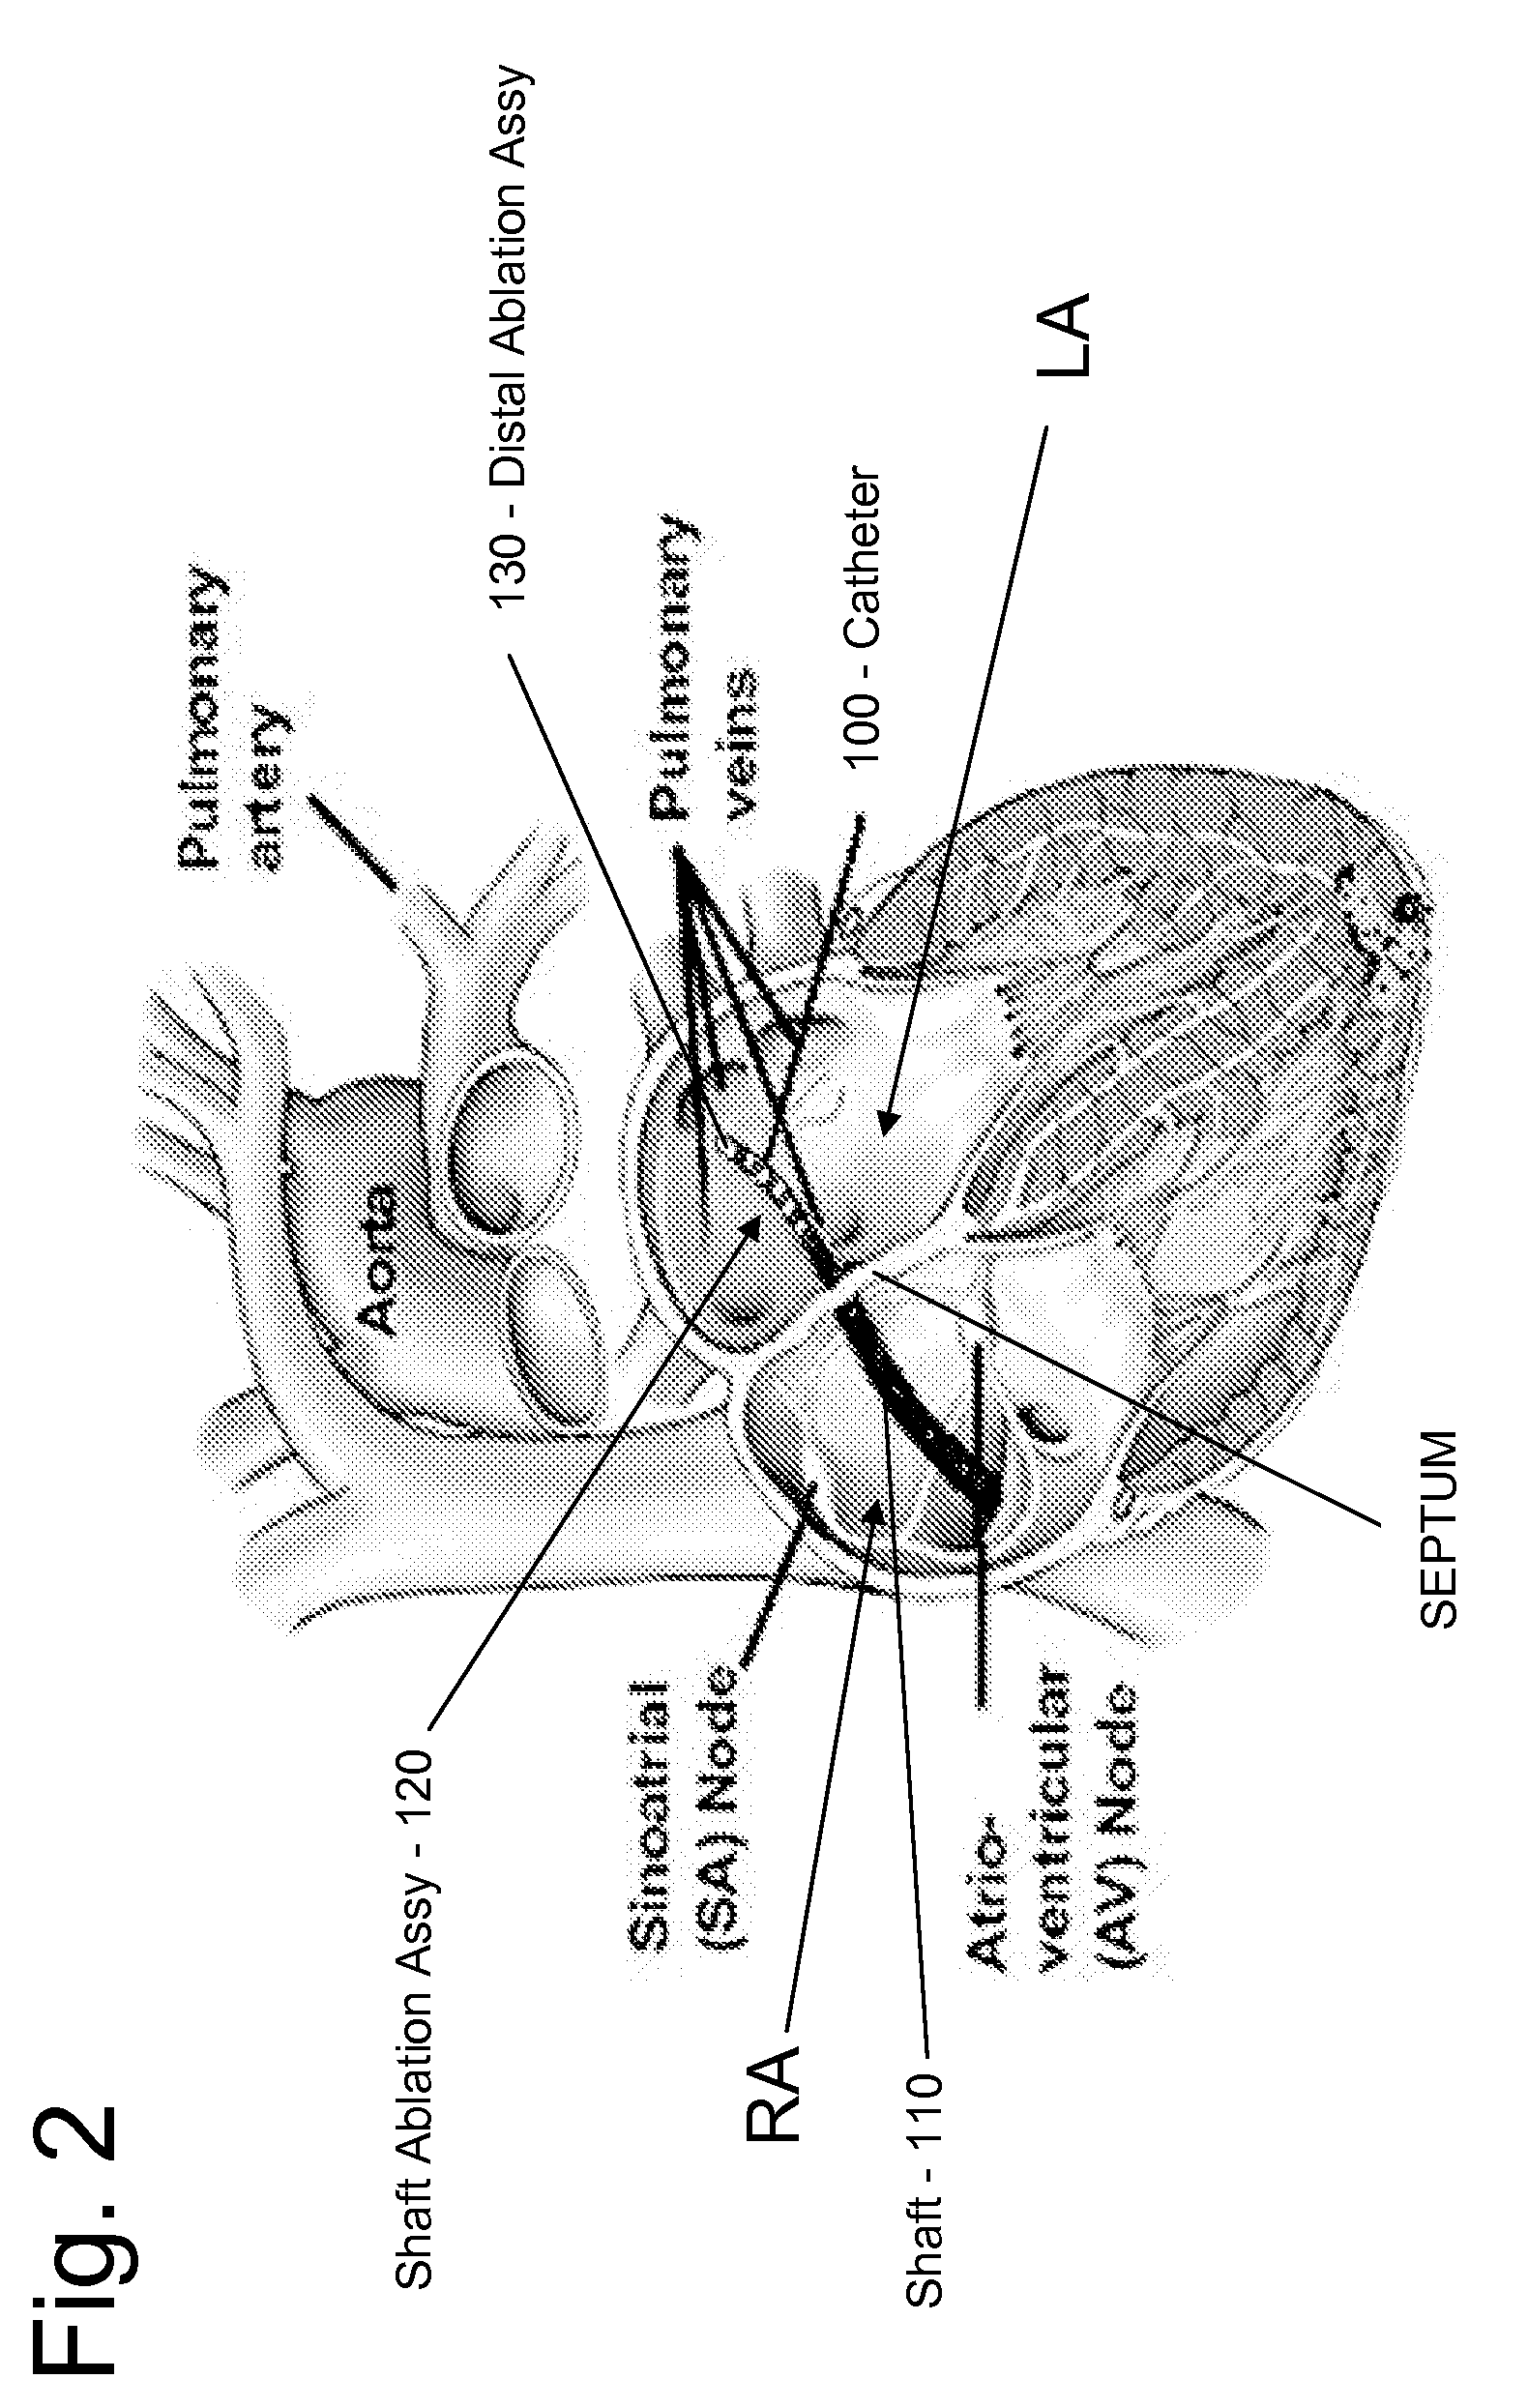 Irrigated Ablation Catheter System and Methods